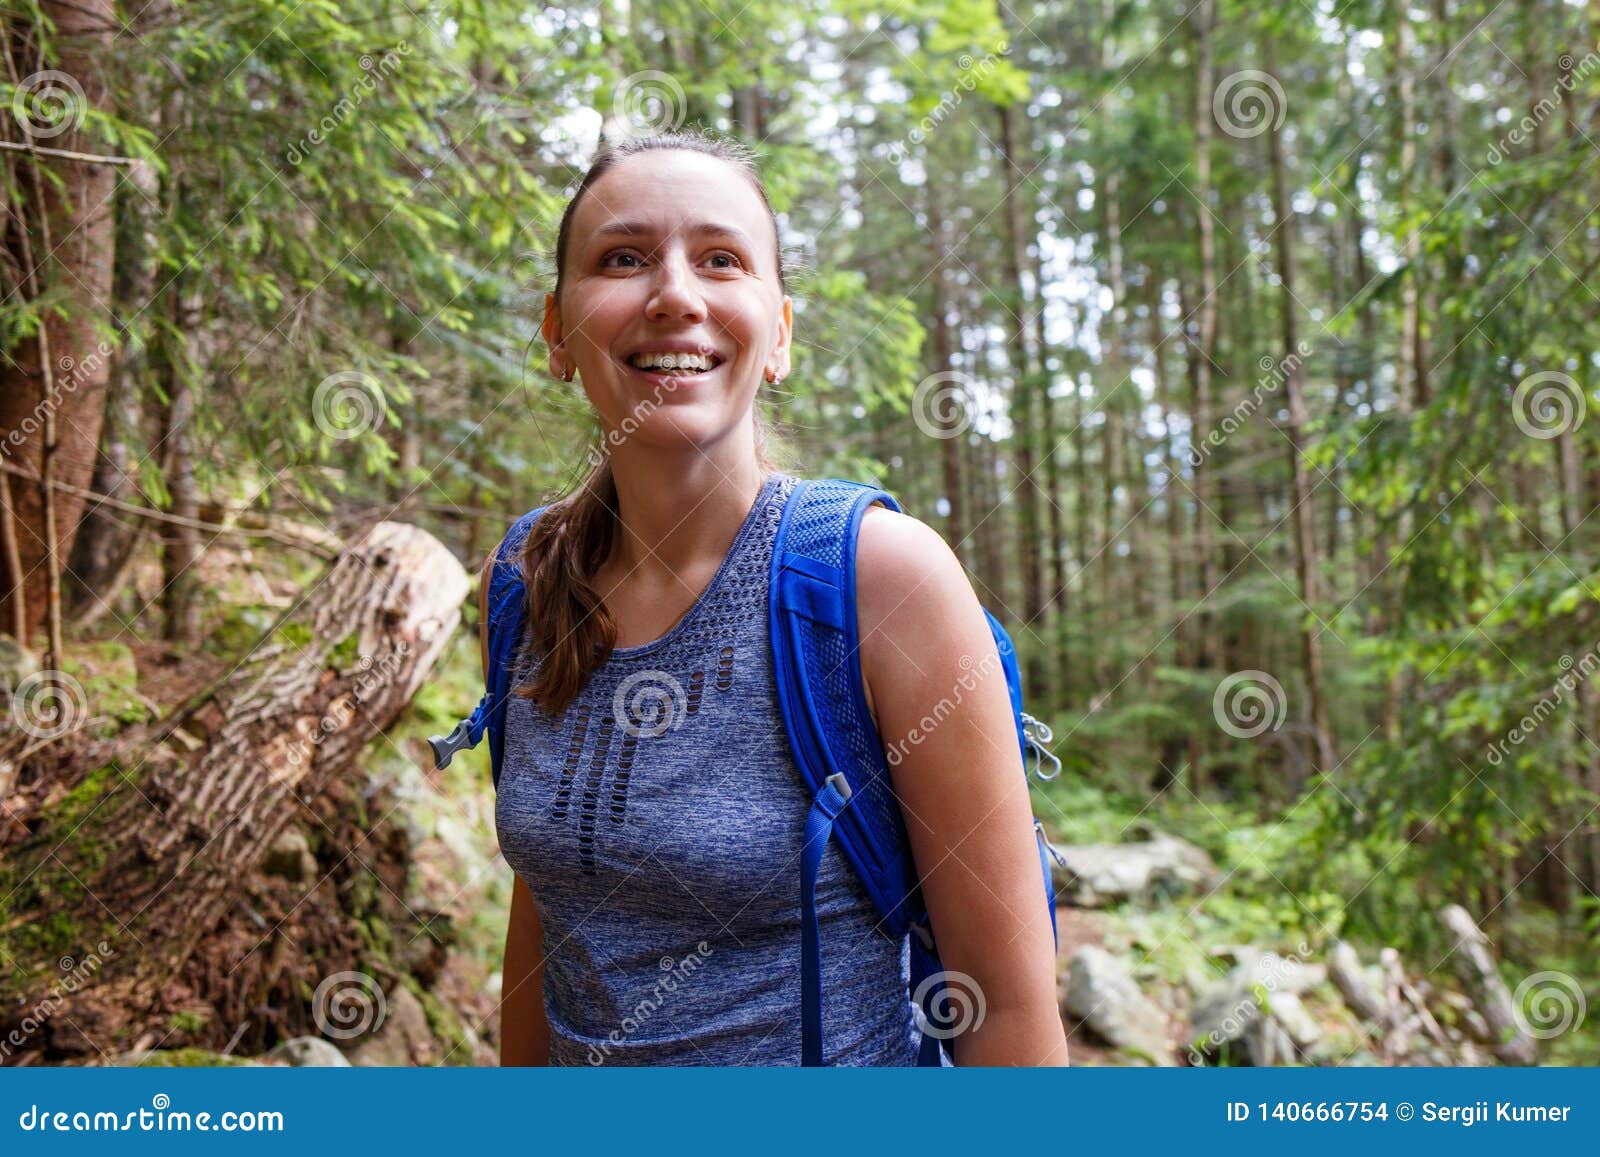 Young Happy Backpacker Woman Walking in Woods Stock Photo - Image of ...